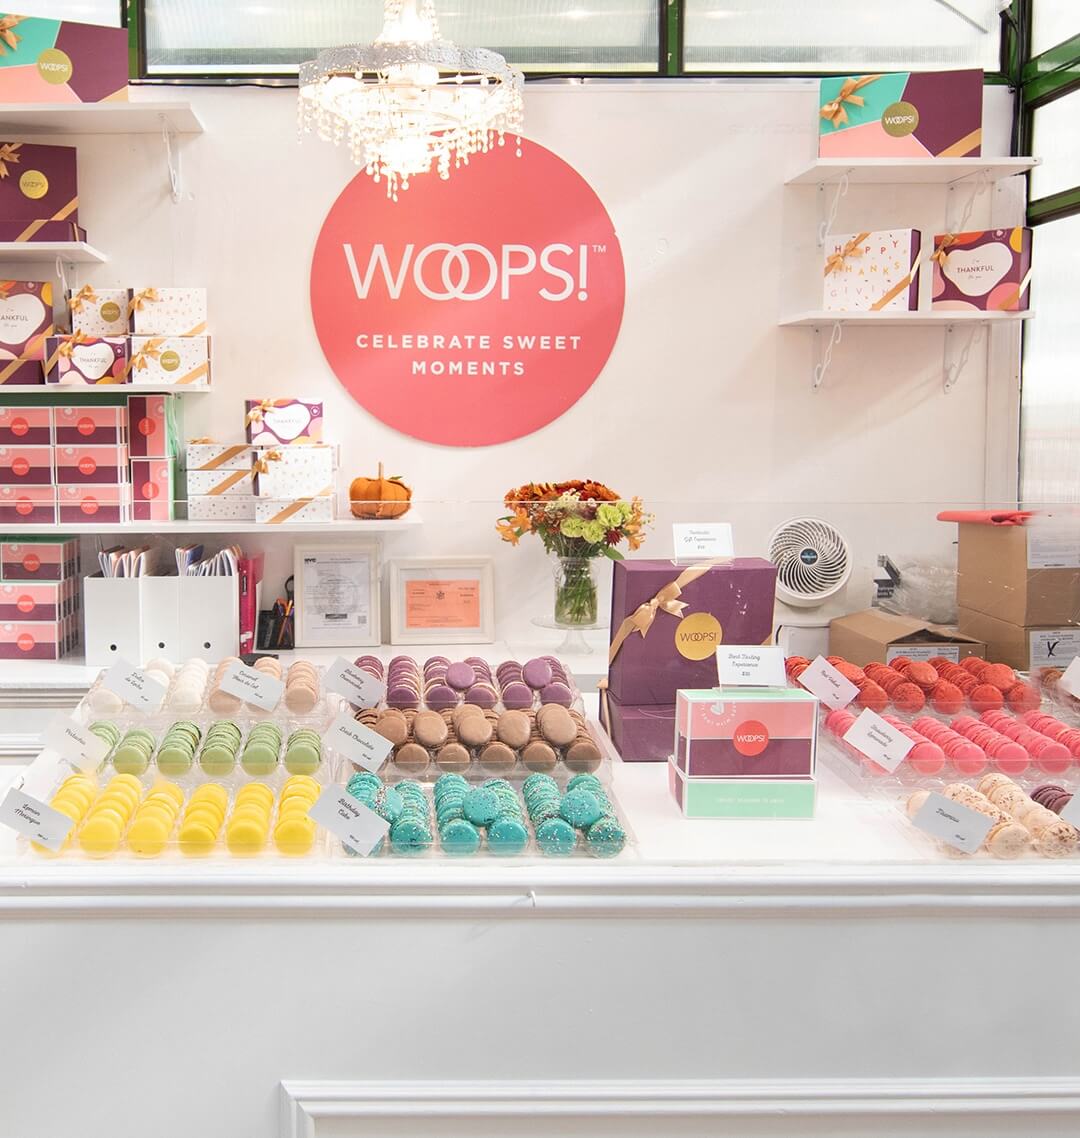 Woops! Booth at Bryant Park filled with colorful macarons and gift boxes